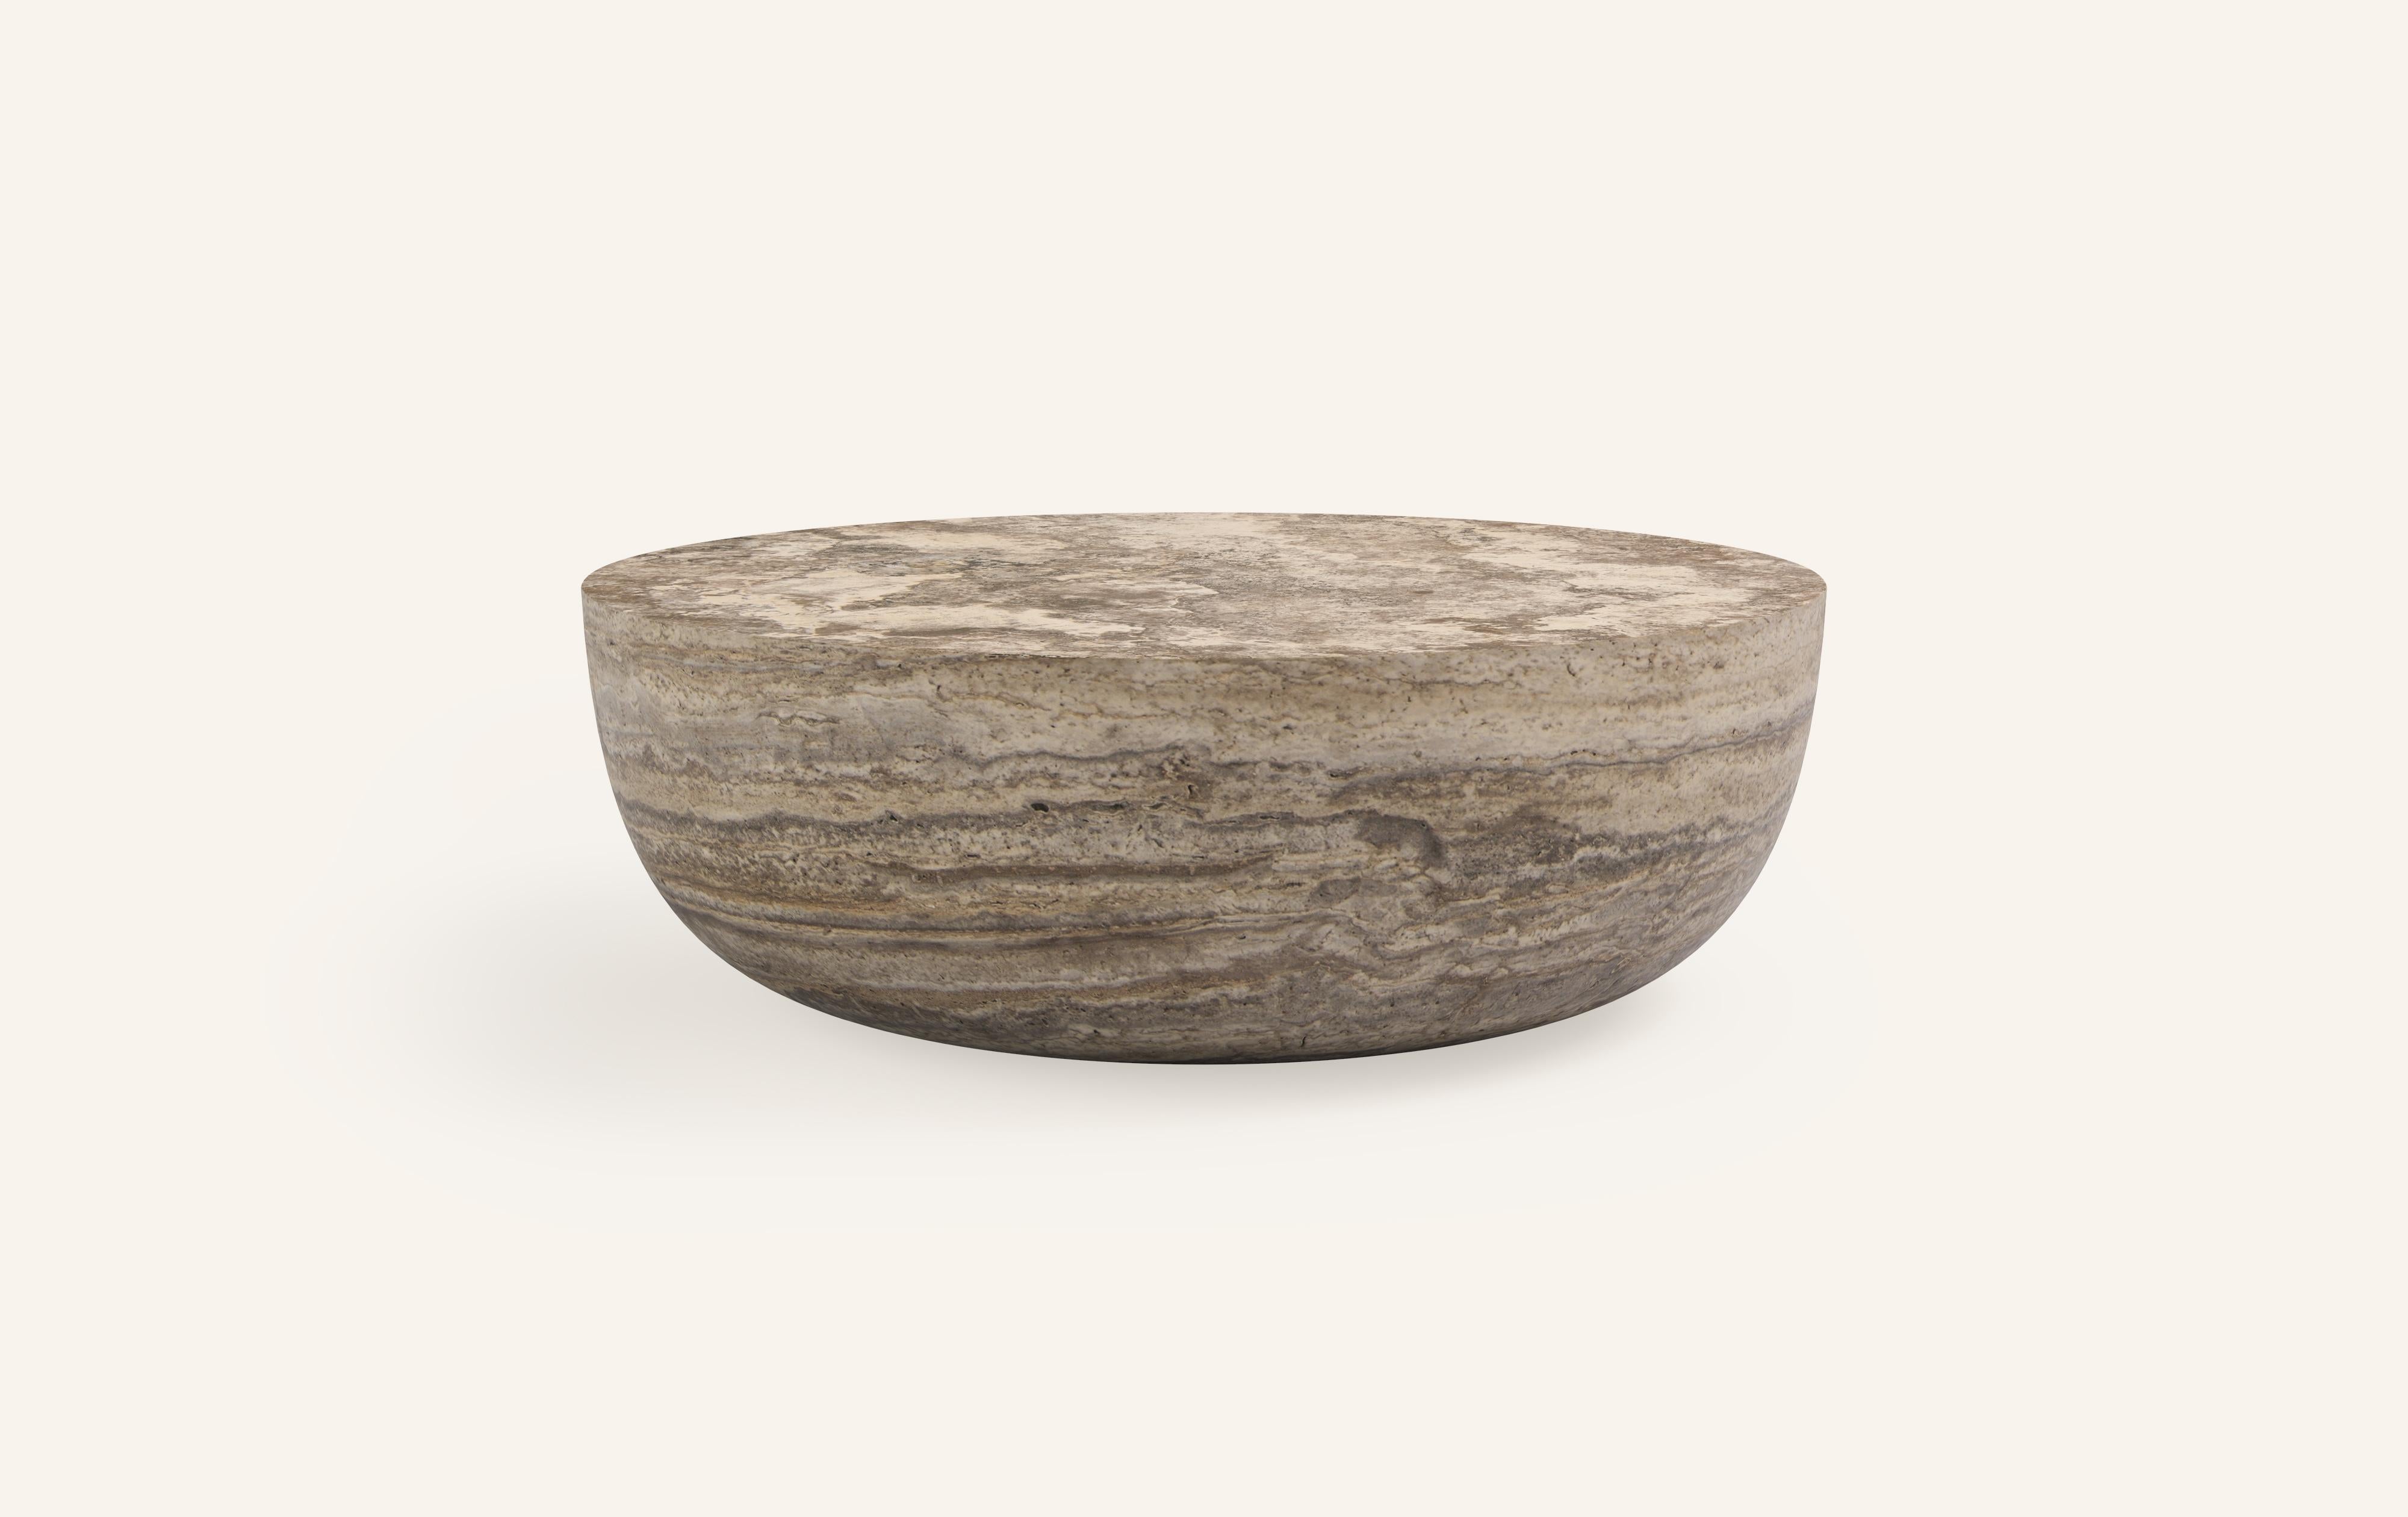 A SLICE OF A ’SPHERE’ OR 'SFERA' IN ITALIAN BALANCES A FLAT SURFACE ATOP AND ROBUST MONOLITH FORM. WITH A BASE SOFTENED BY A CURVED PROFILE, SFERA IS SOFT AND EARTHY IN ITS AVAILABLE STONE SELECTIONS.

DIMENSIONS: 
48”L x 48”W x 16”H: 
- SOLID